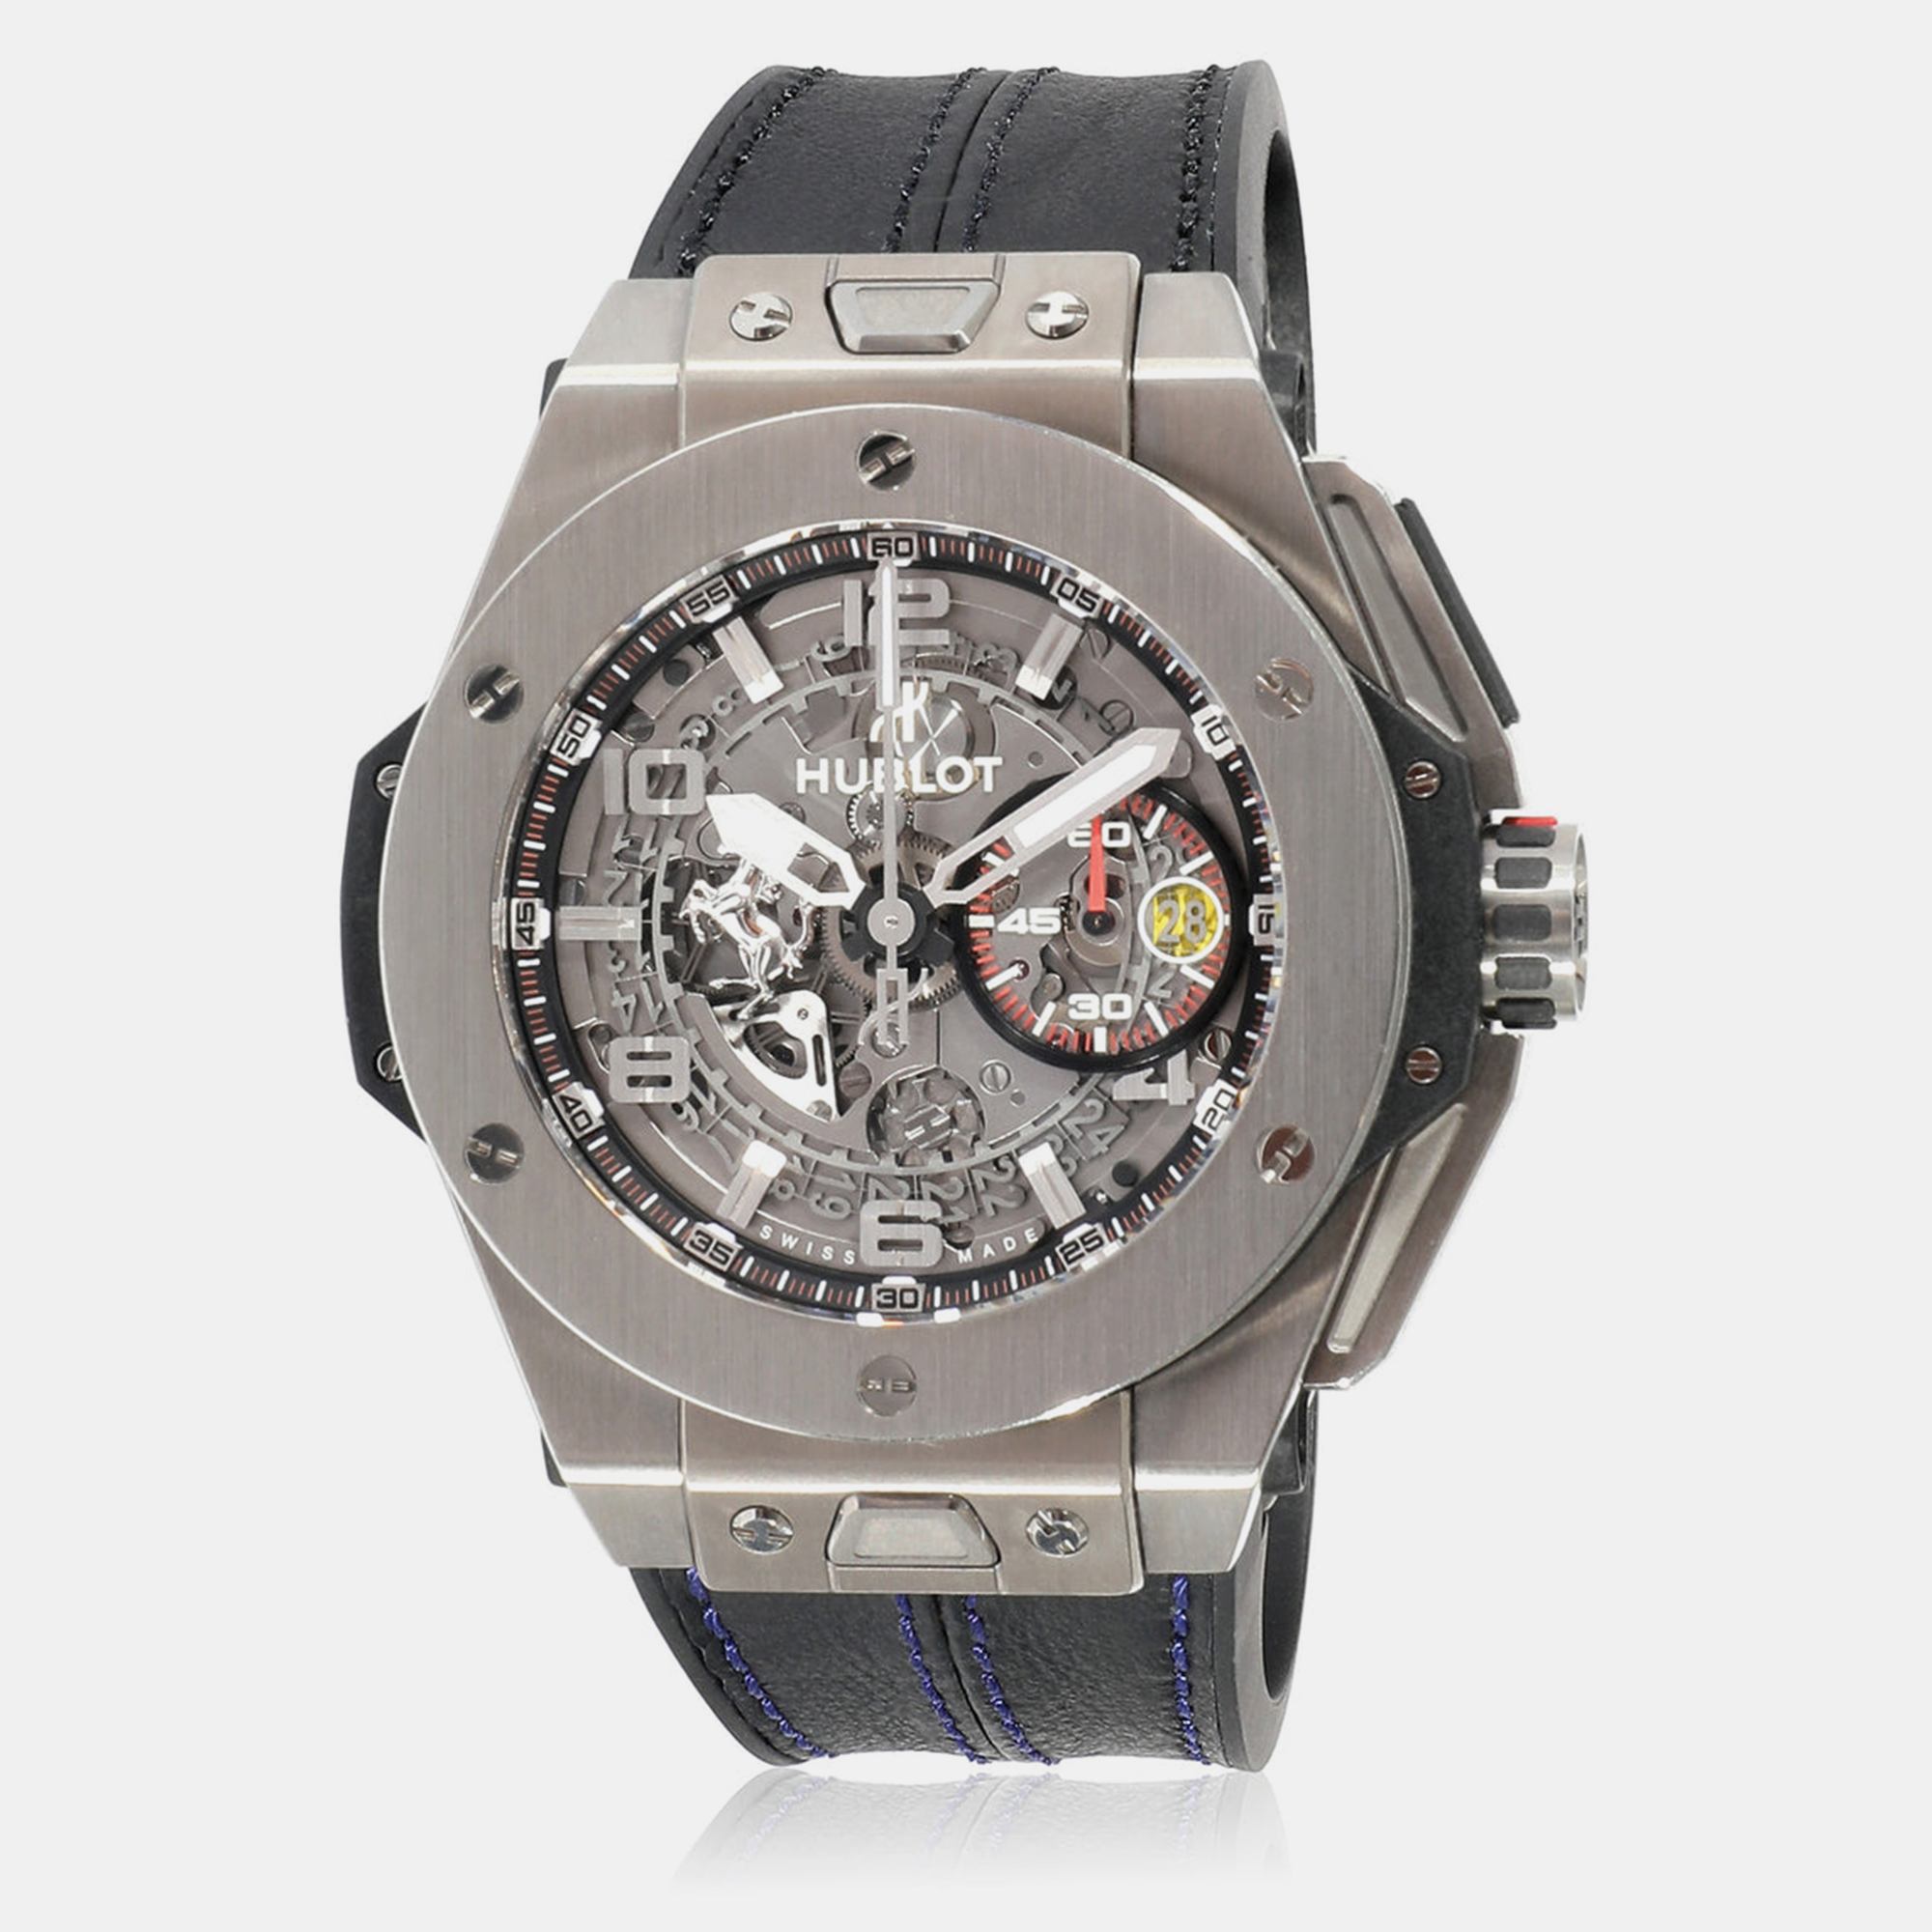 Let this fine Hublot wristwatch accompany you with ease and luxurious style. Beautifully crafted using the best quality materials this authentic branded watch is built to be a standout accessory for your wrist.